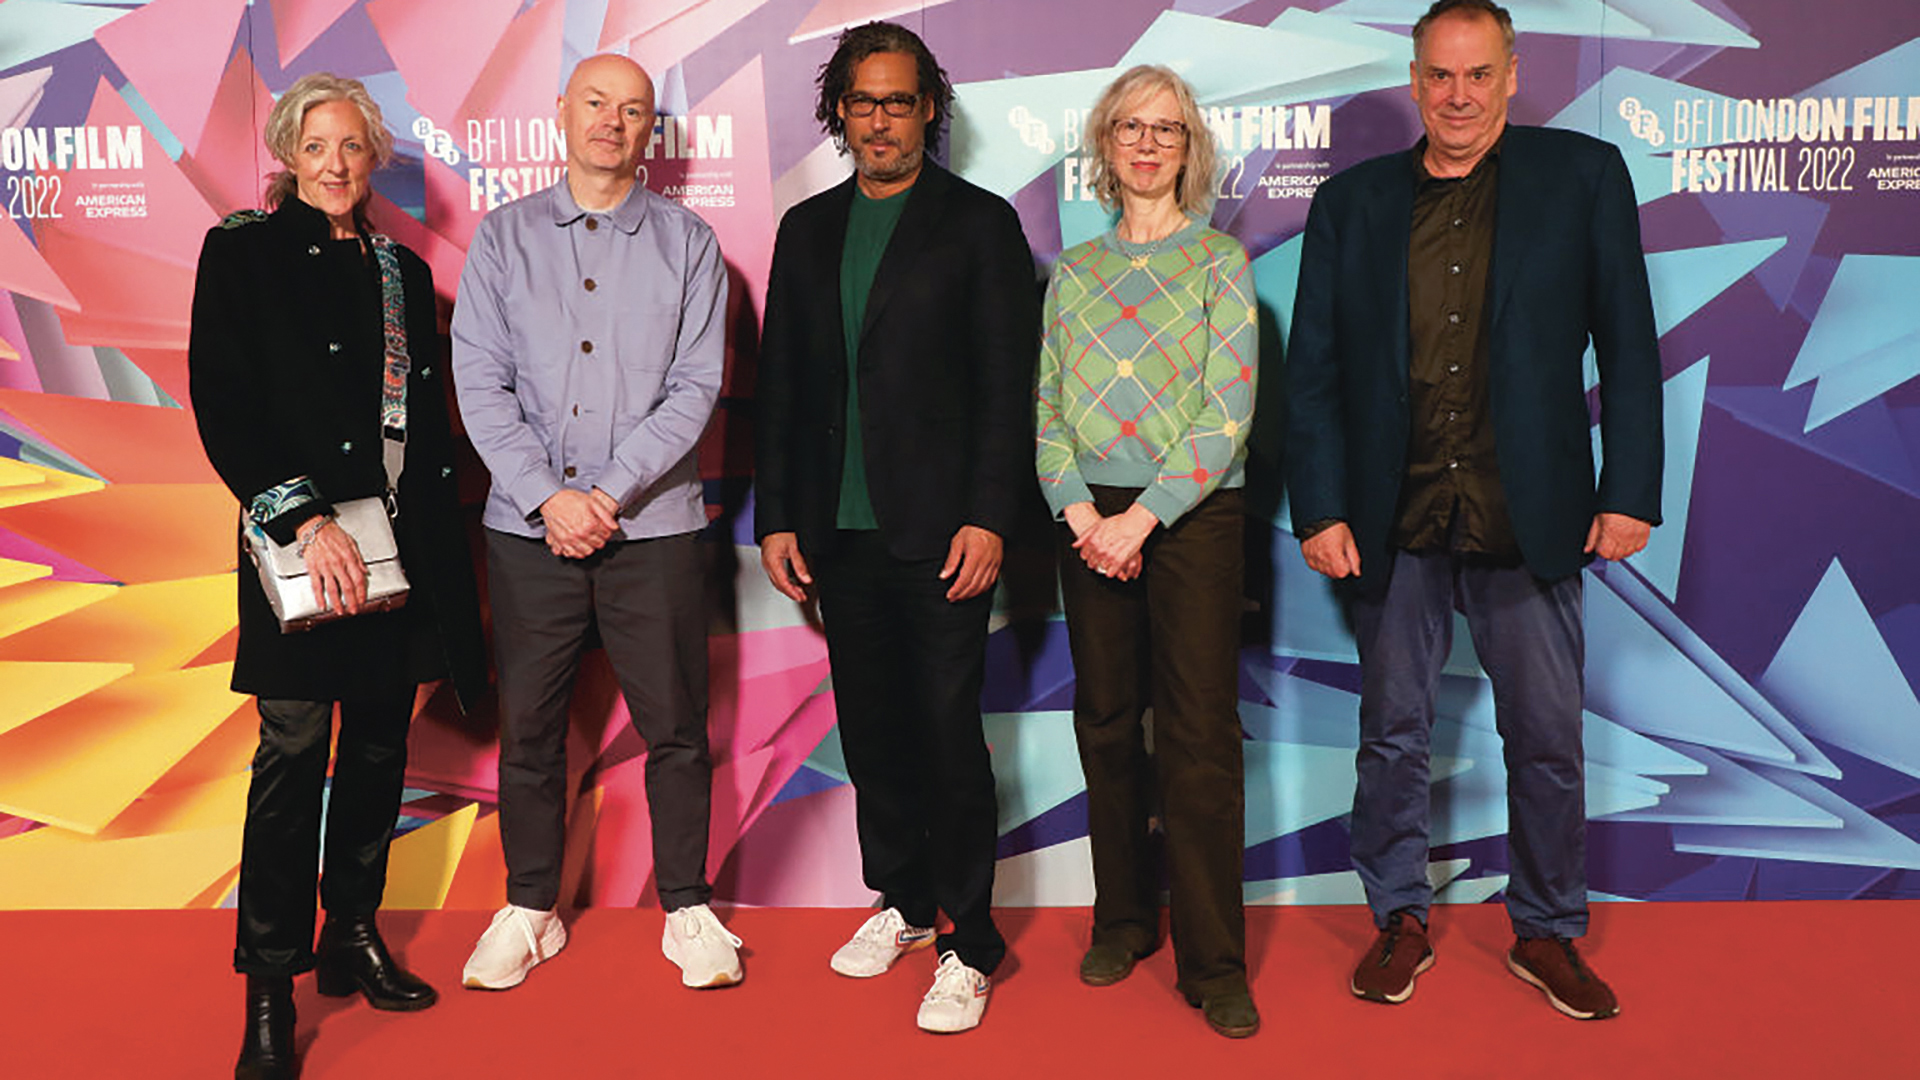 David Olusoga with others at the BFI London Film Festival